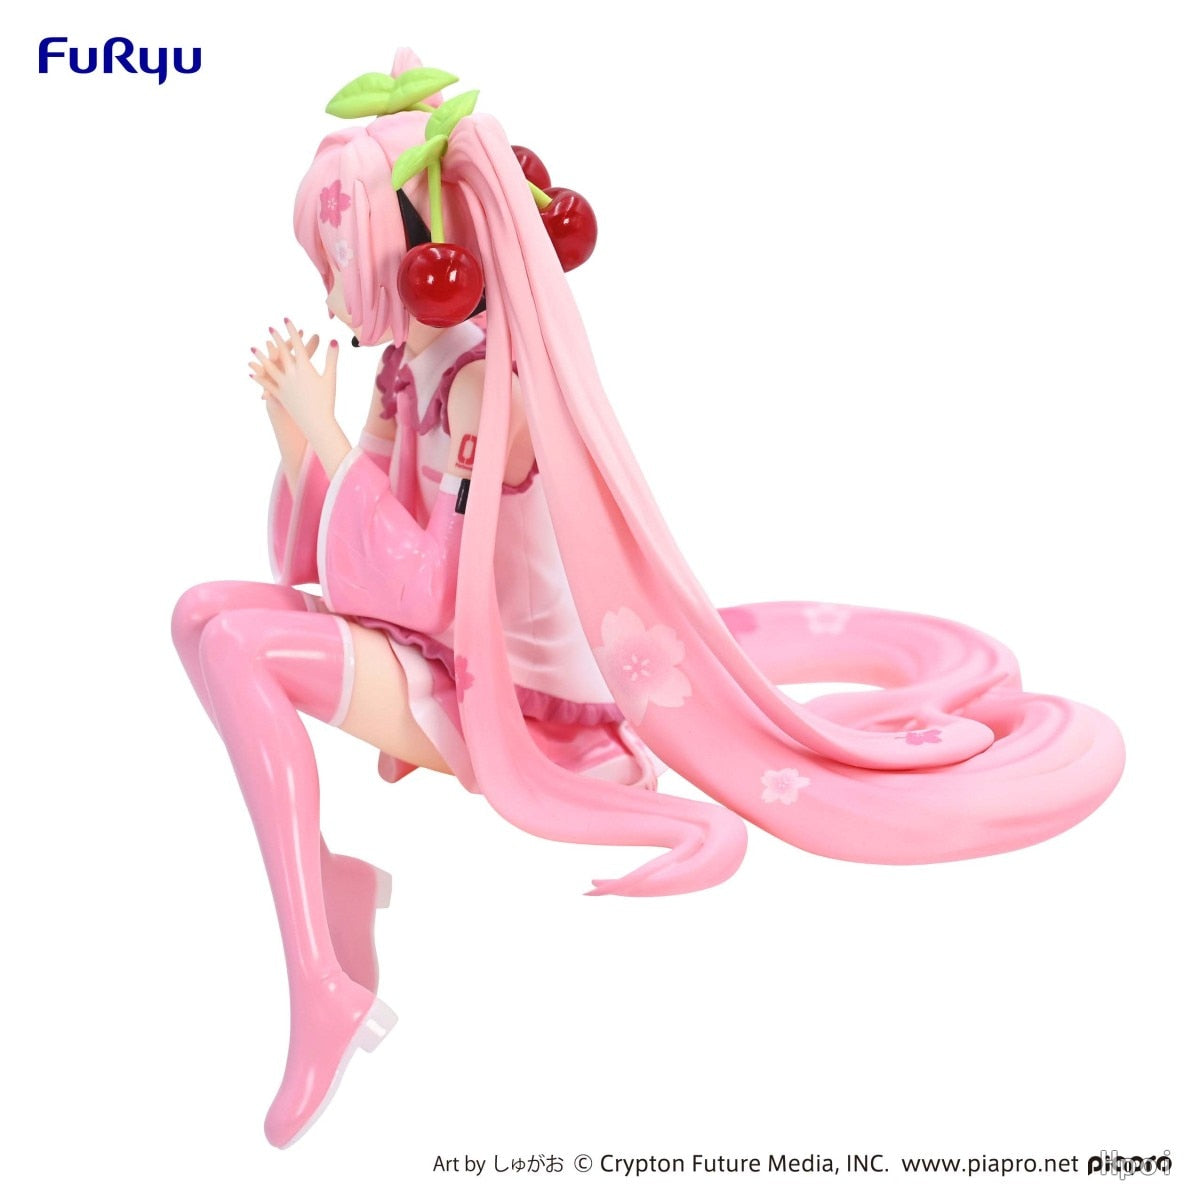 This figurine captures the essence of Sakura Miku, adorned in hues of cherry blossoms.  If you are looking for more Sakura Miku Merch, We have it all! | Check out all our Anime Merch now!